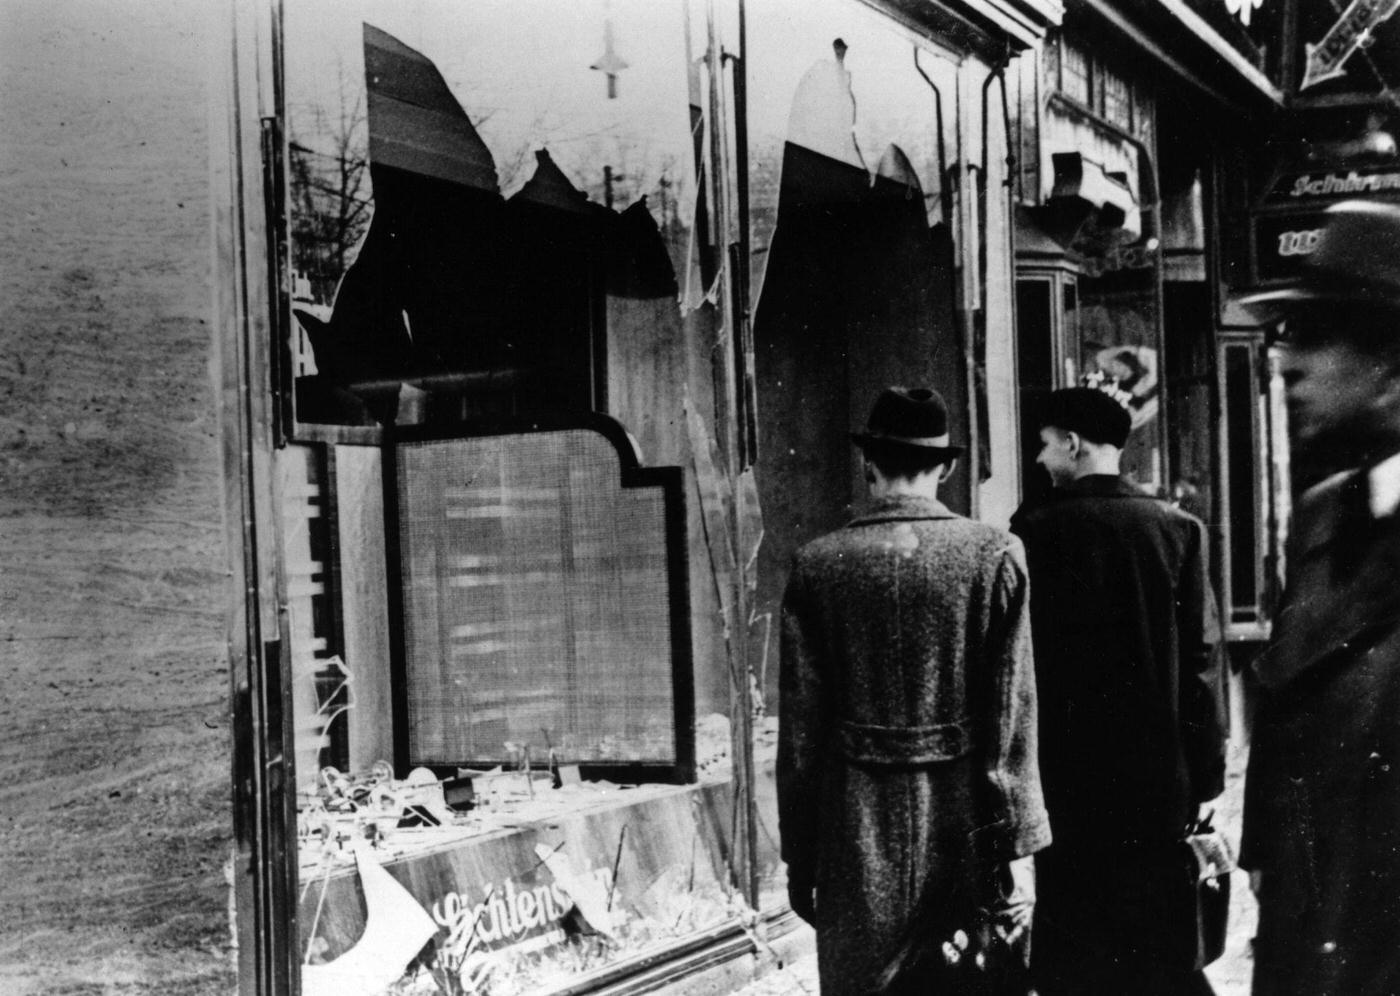 Onlookers at a smashed Jewish shop window in Berlin after Kristallnacht, November 1938.